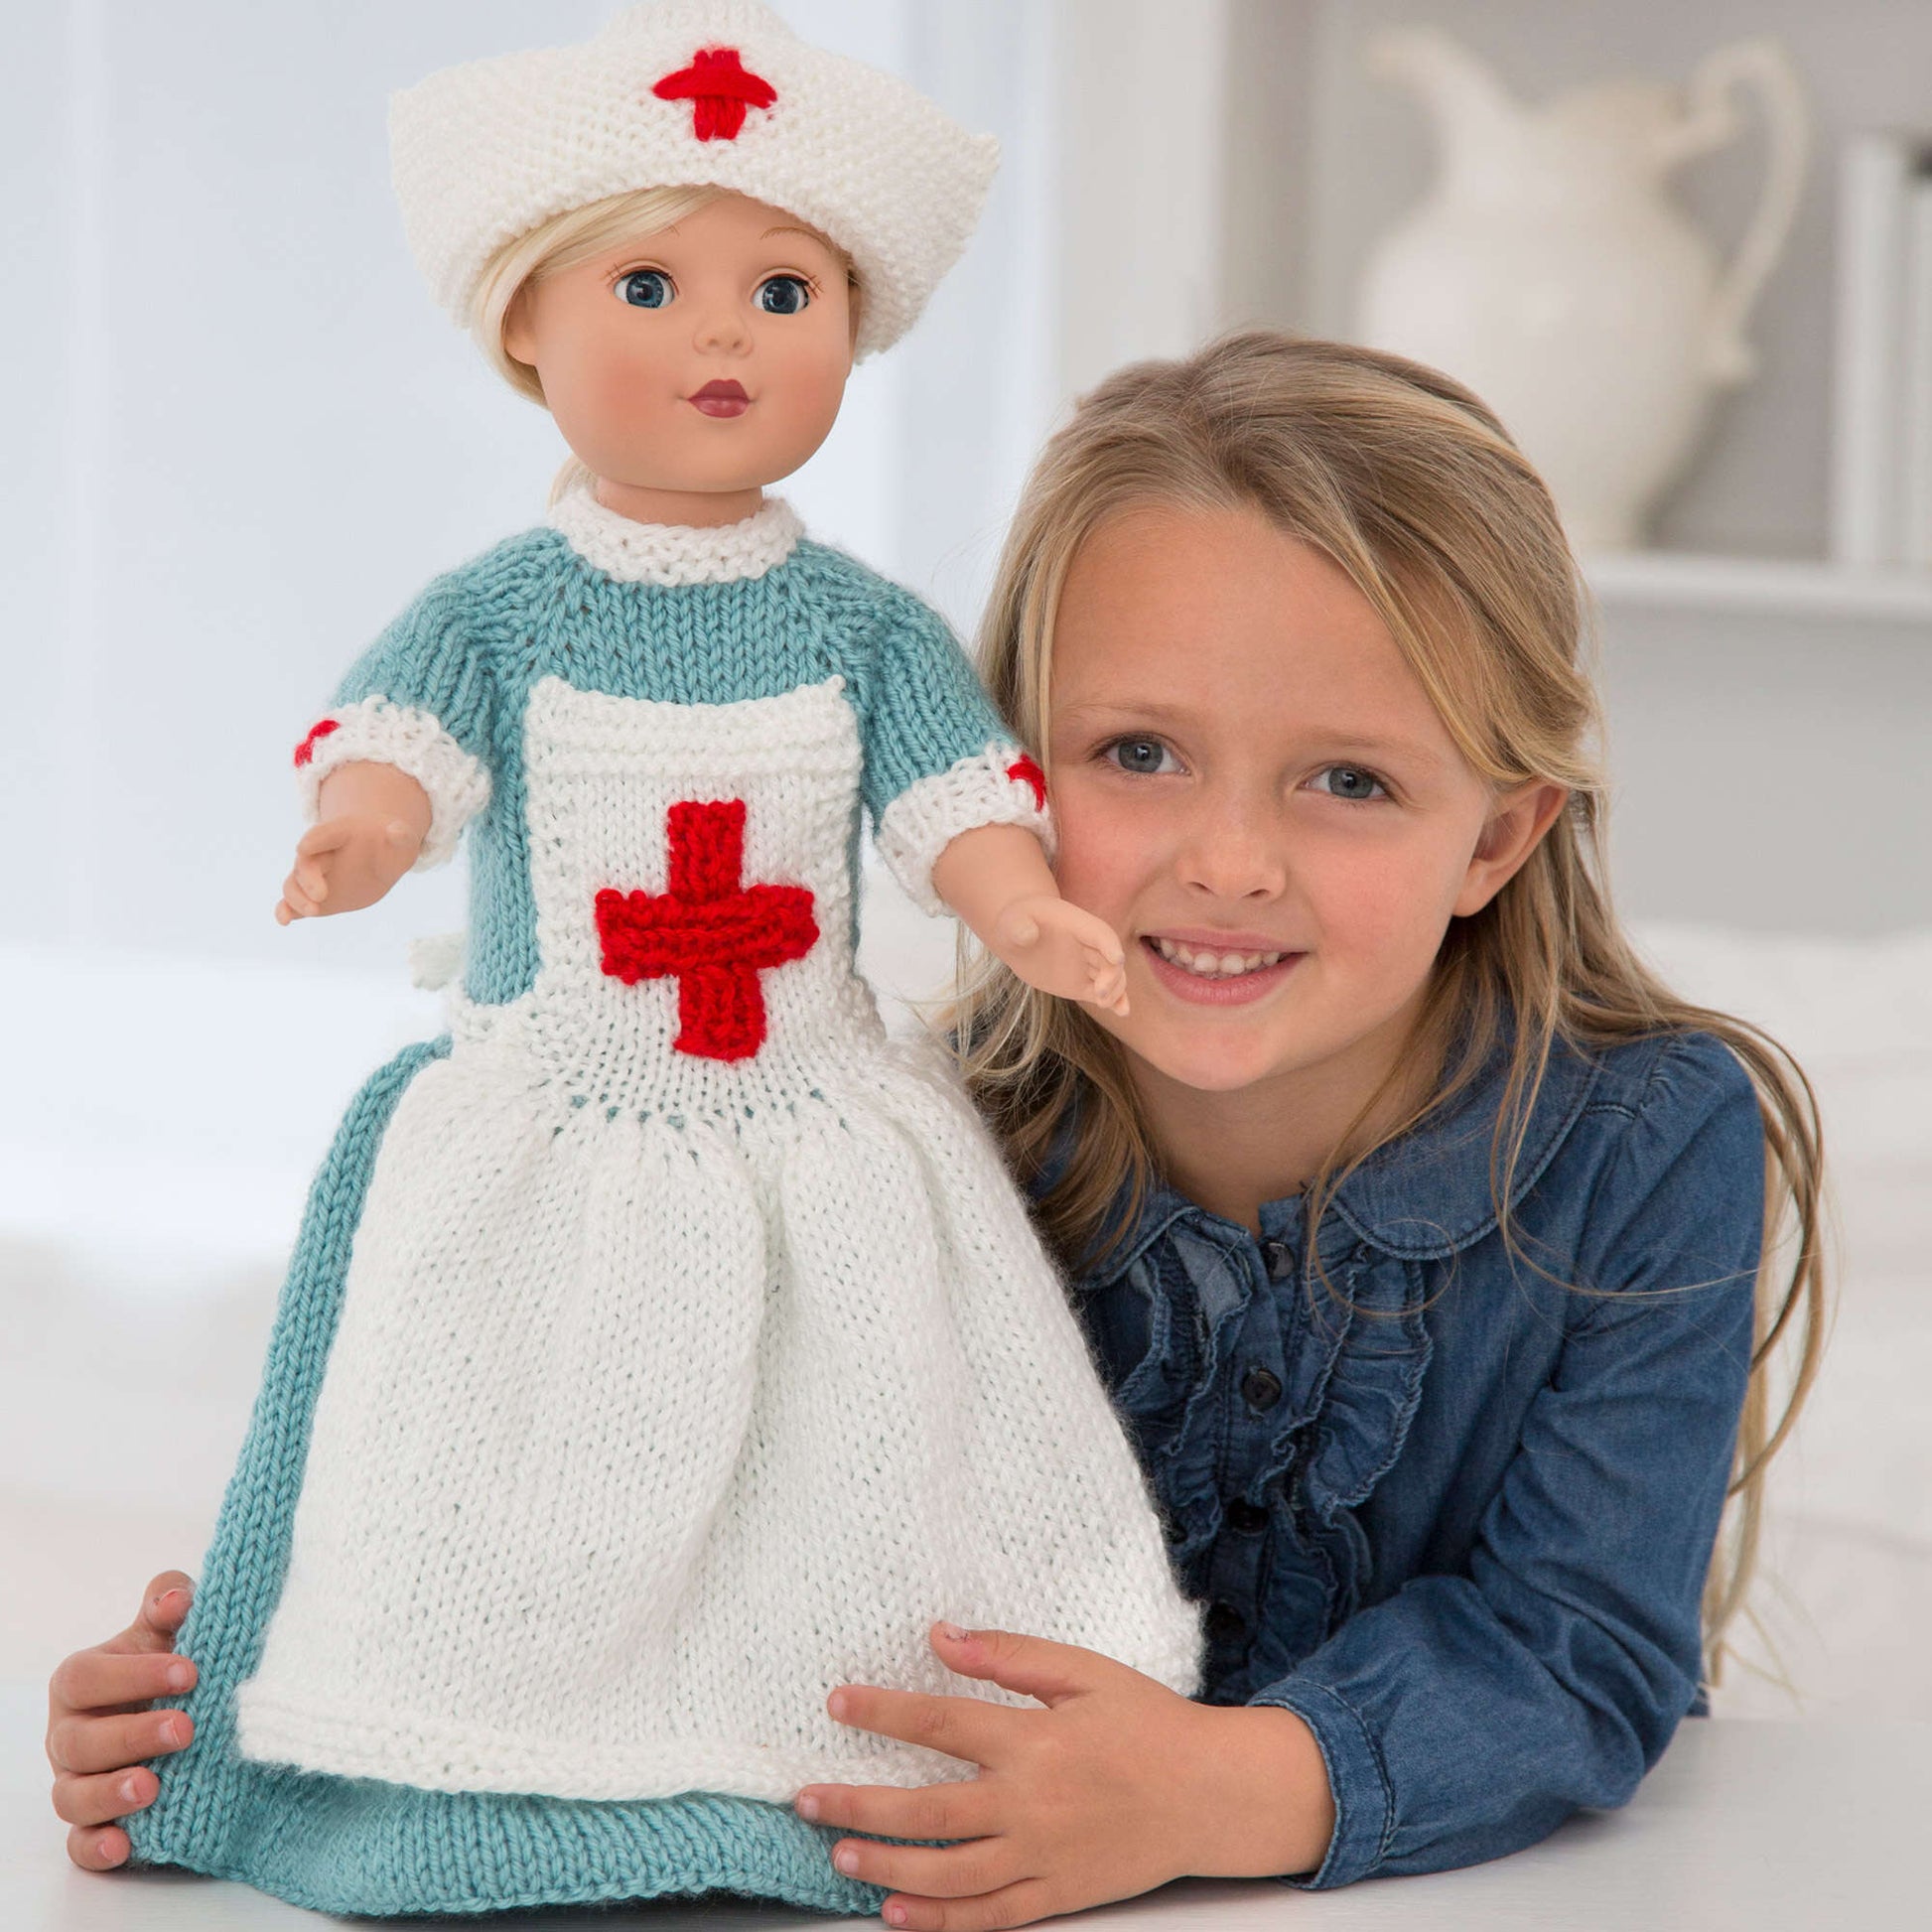 Free Red Heart Caring Nurse Doll To Knit Pattern